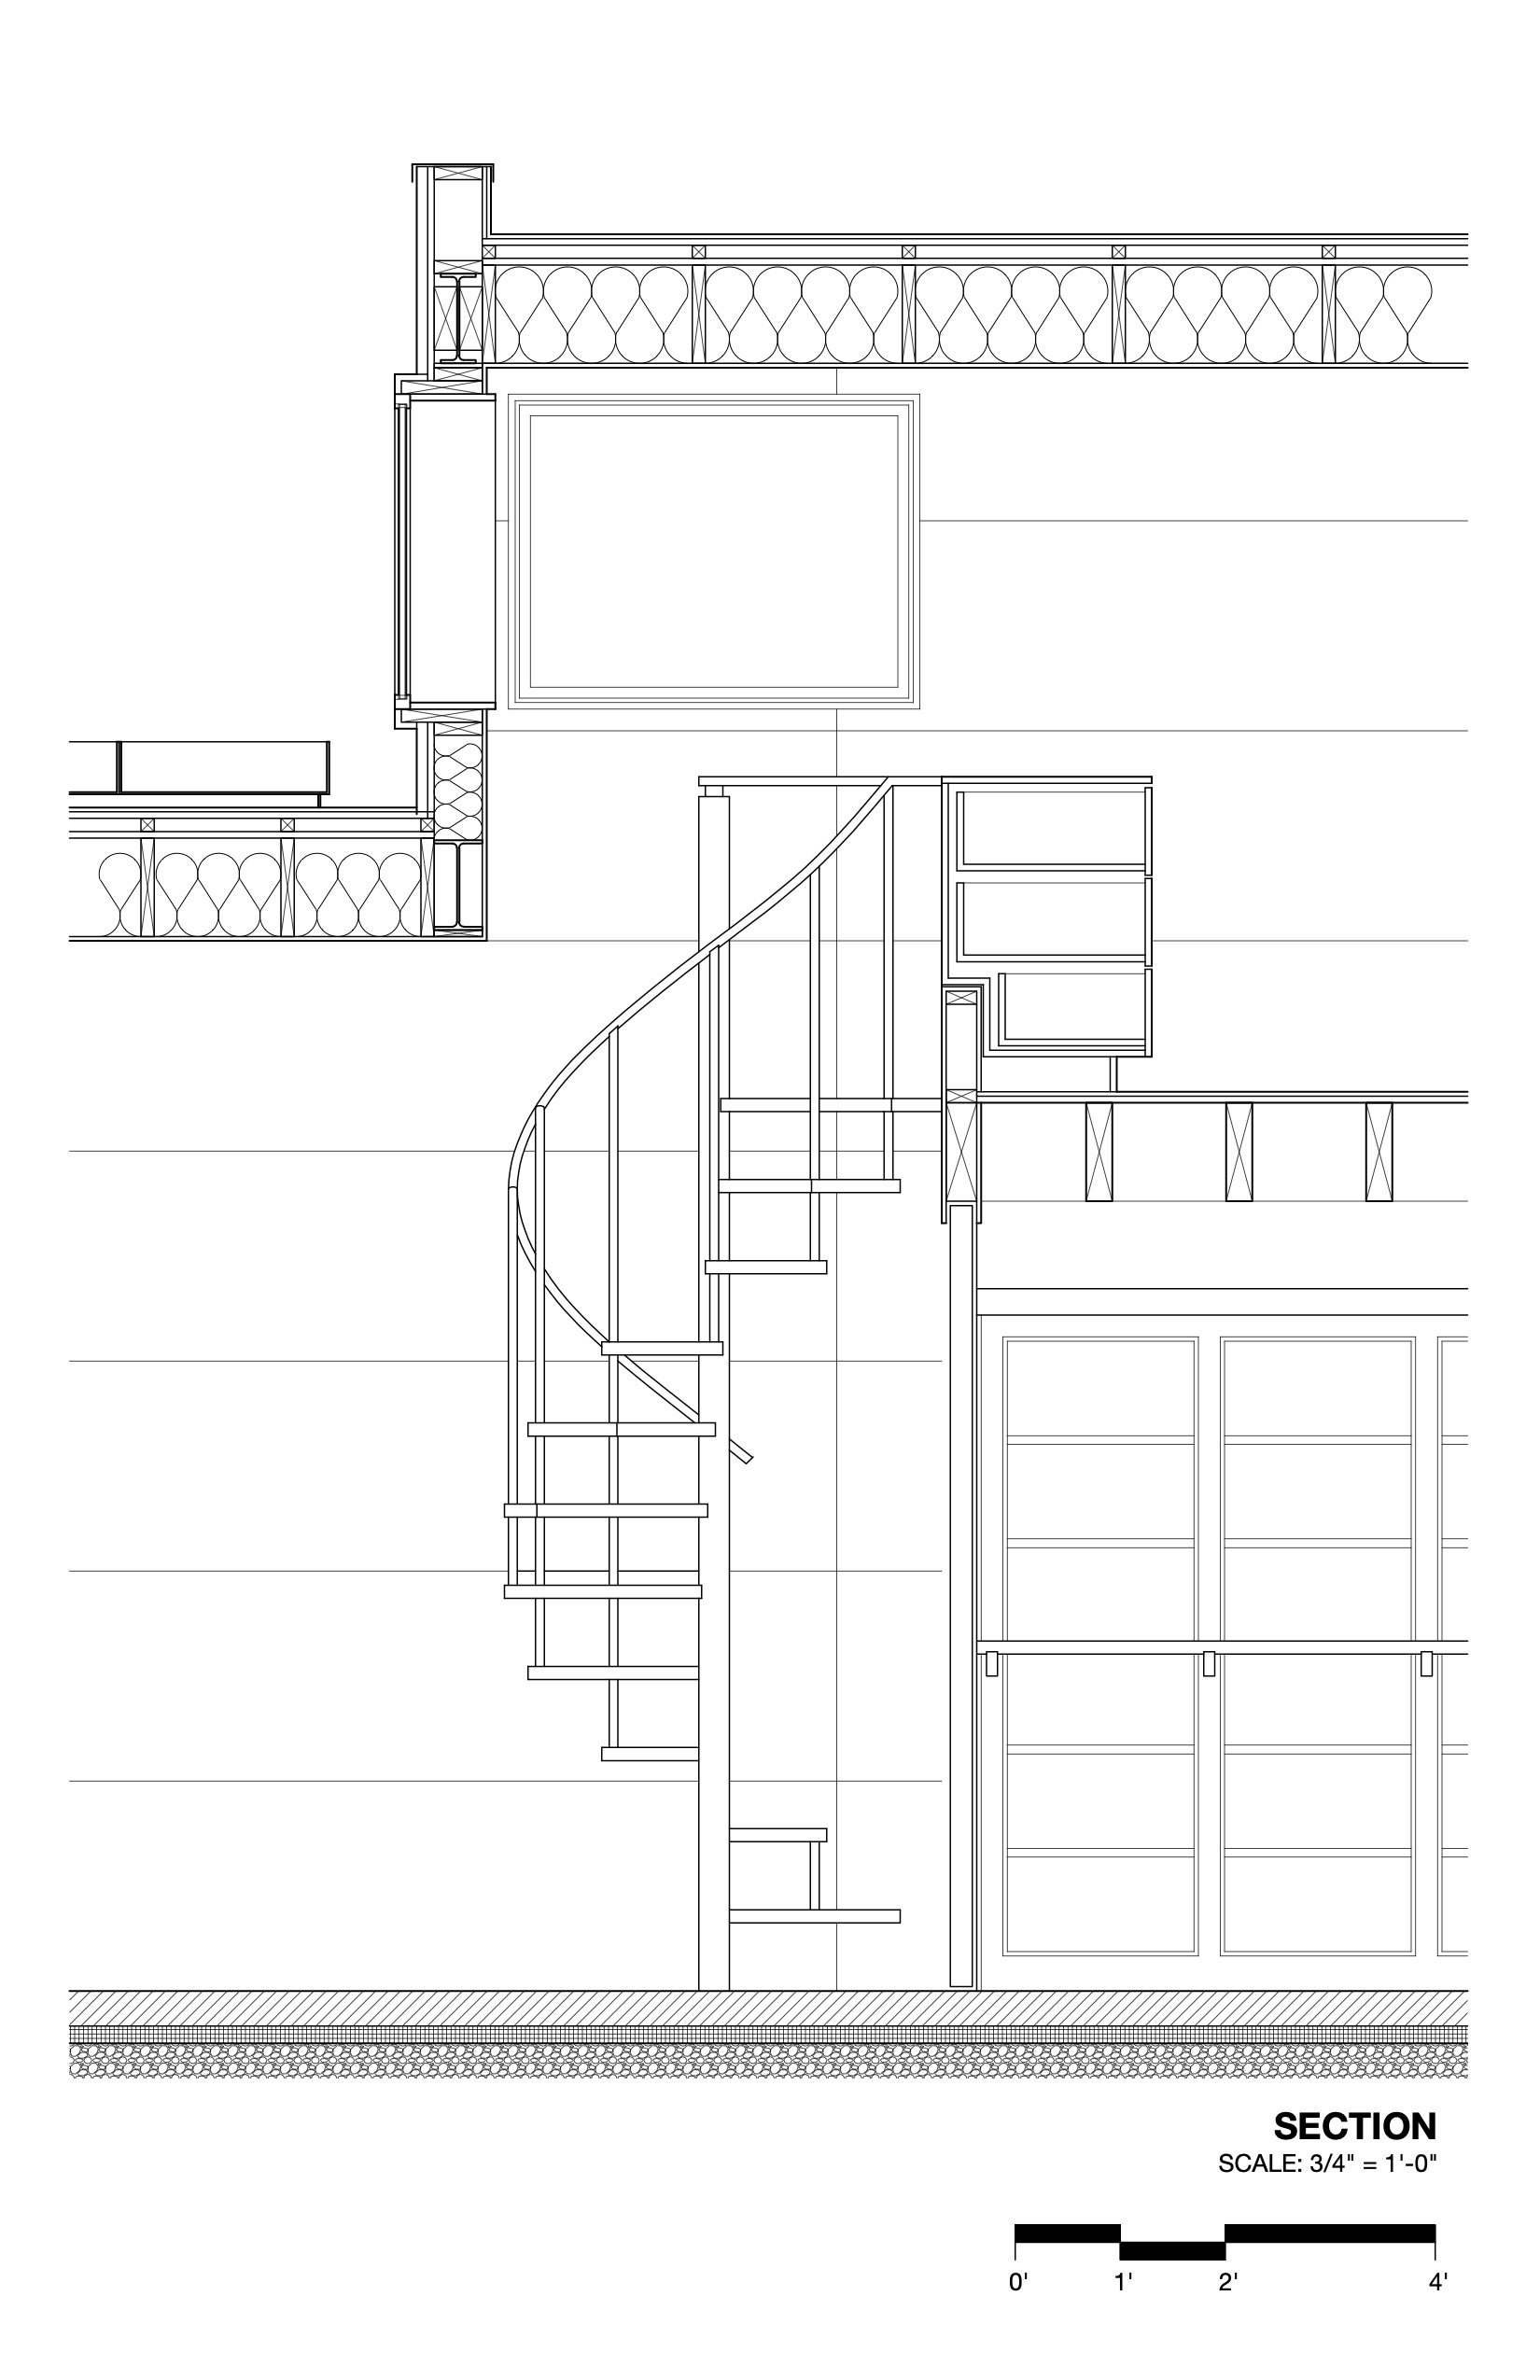 7 section - stair.jpg